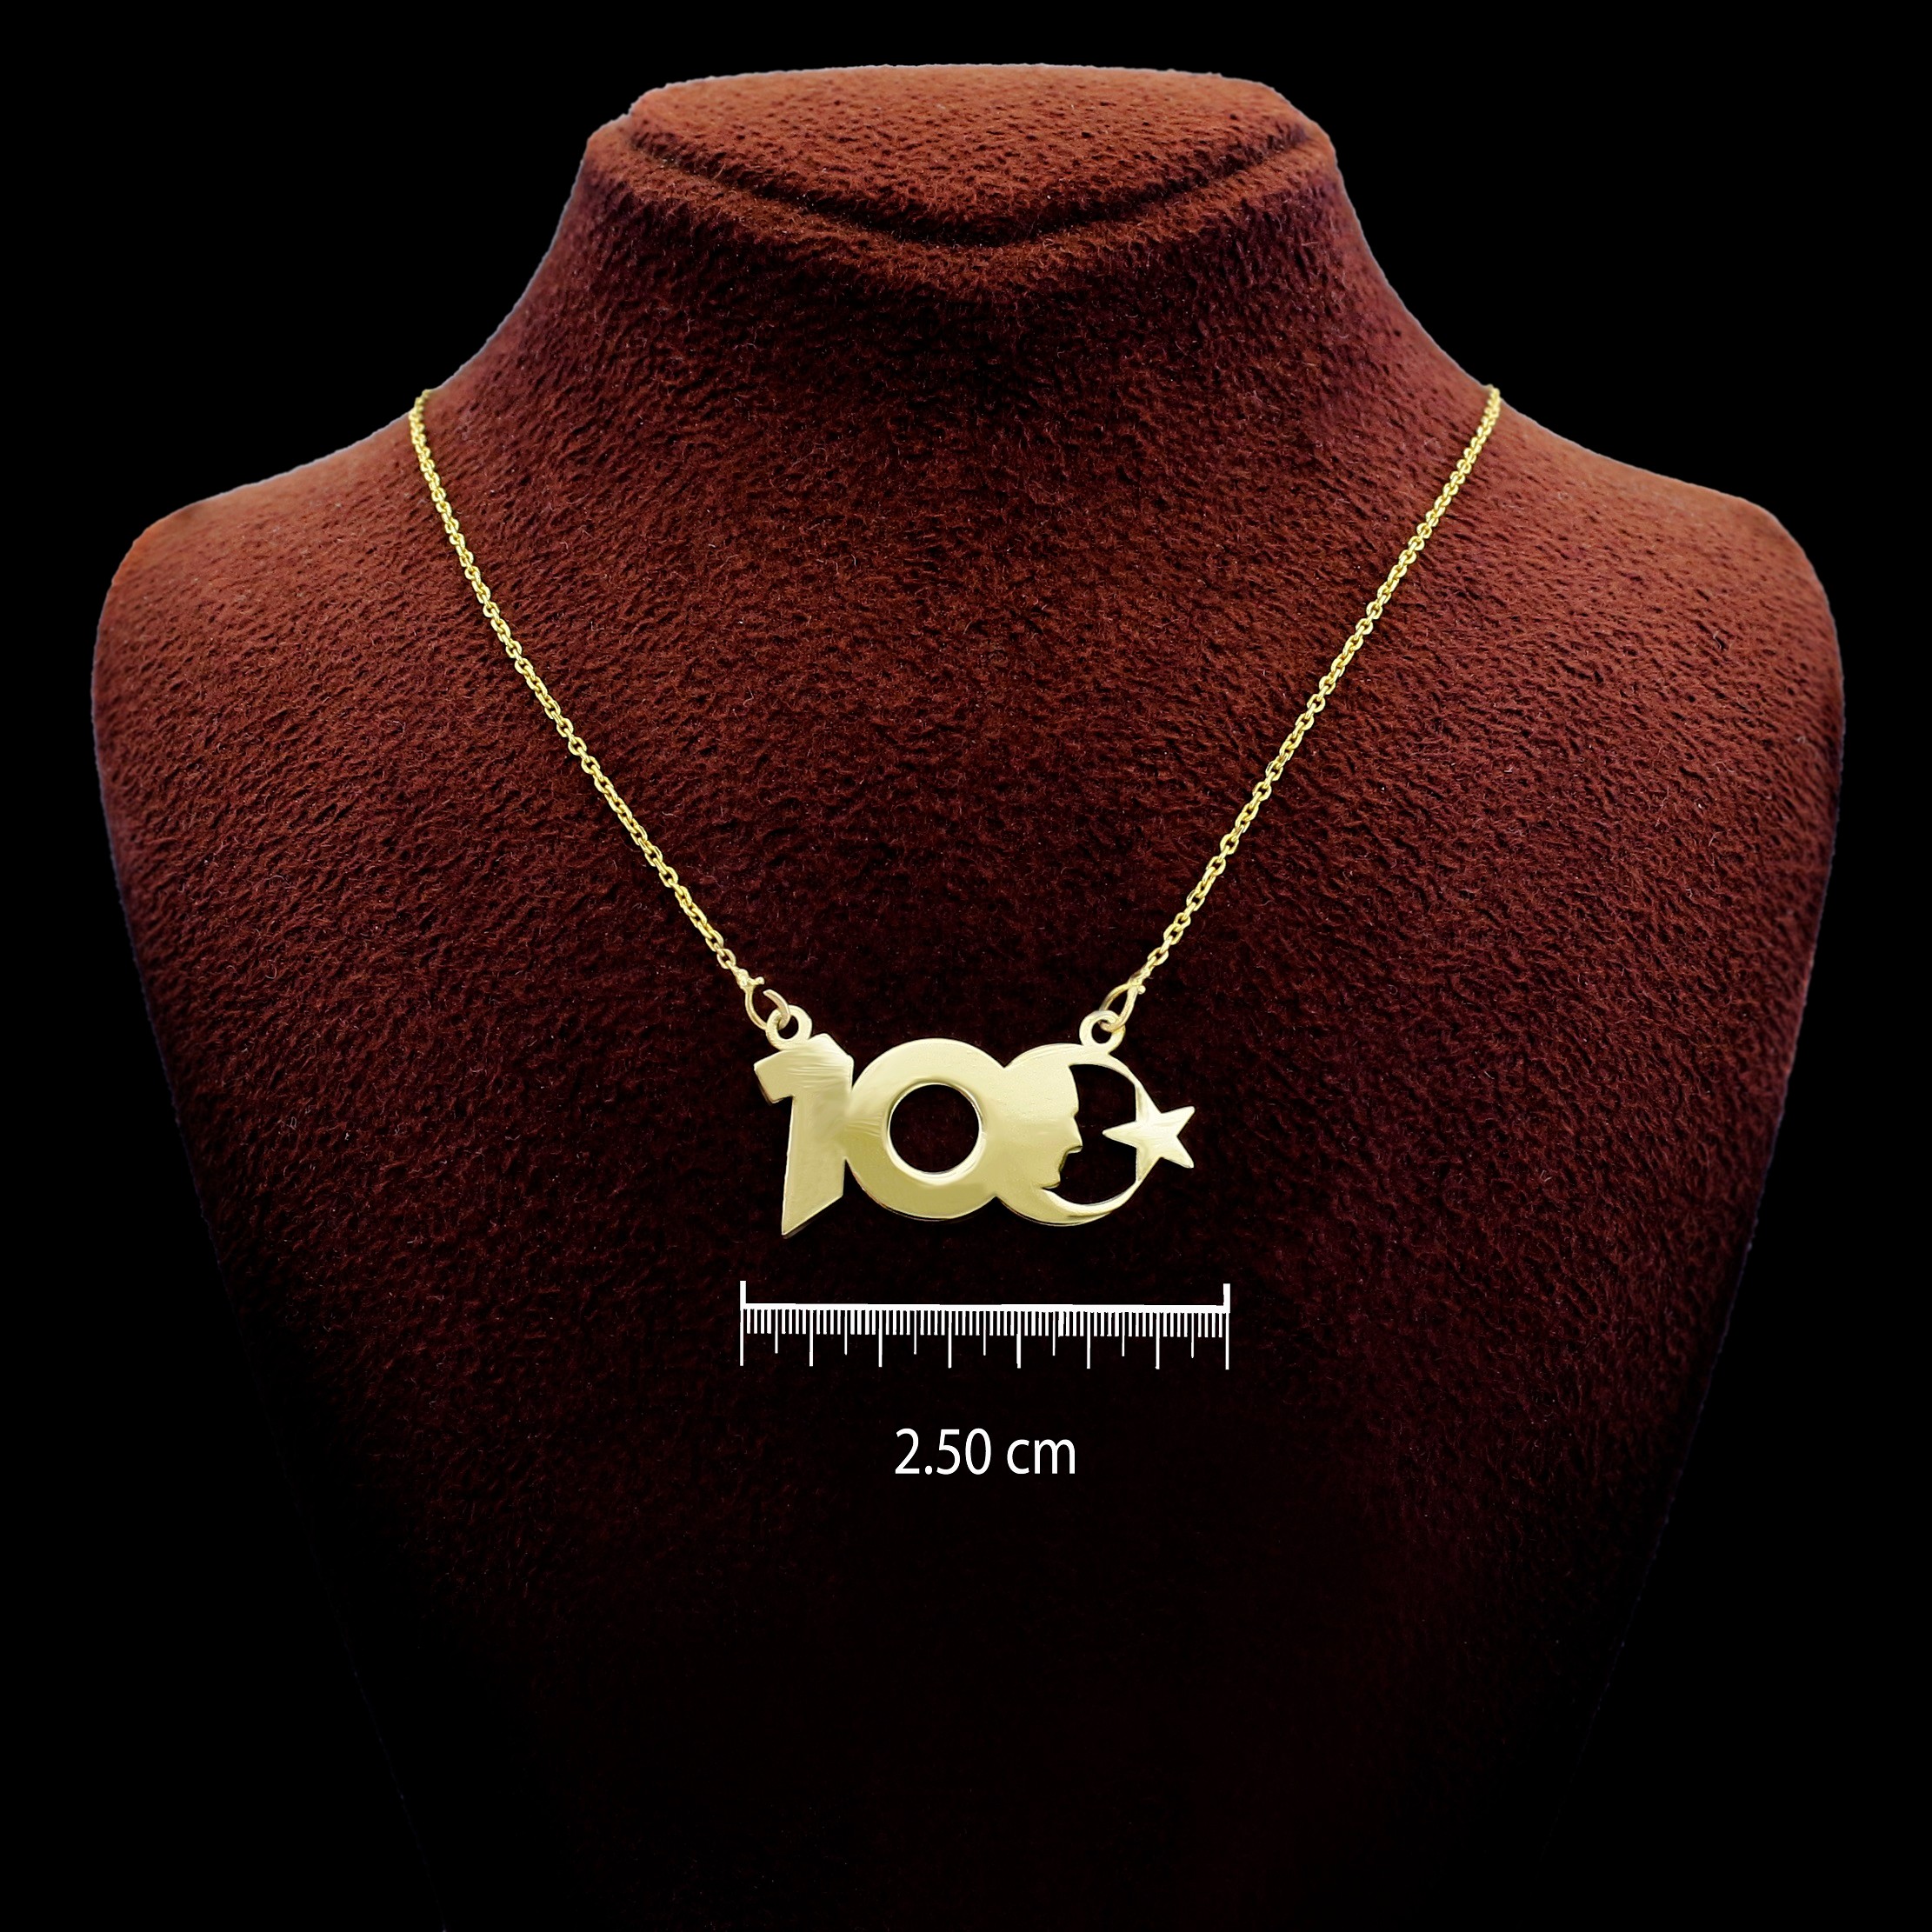 100th Anniversary Necklace